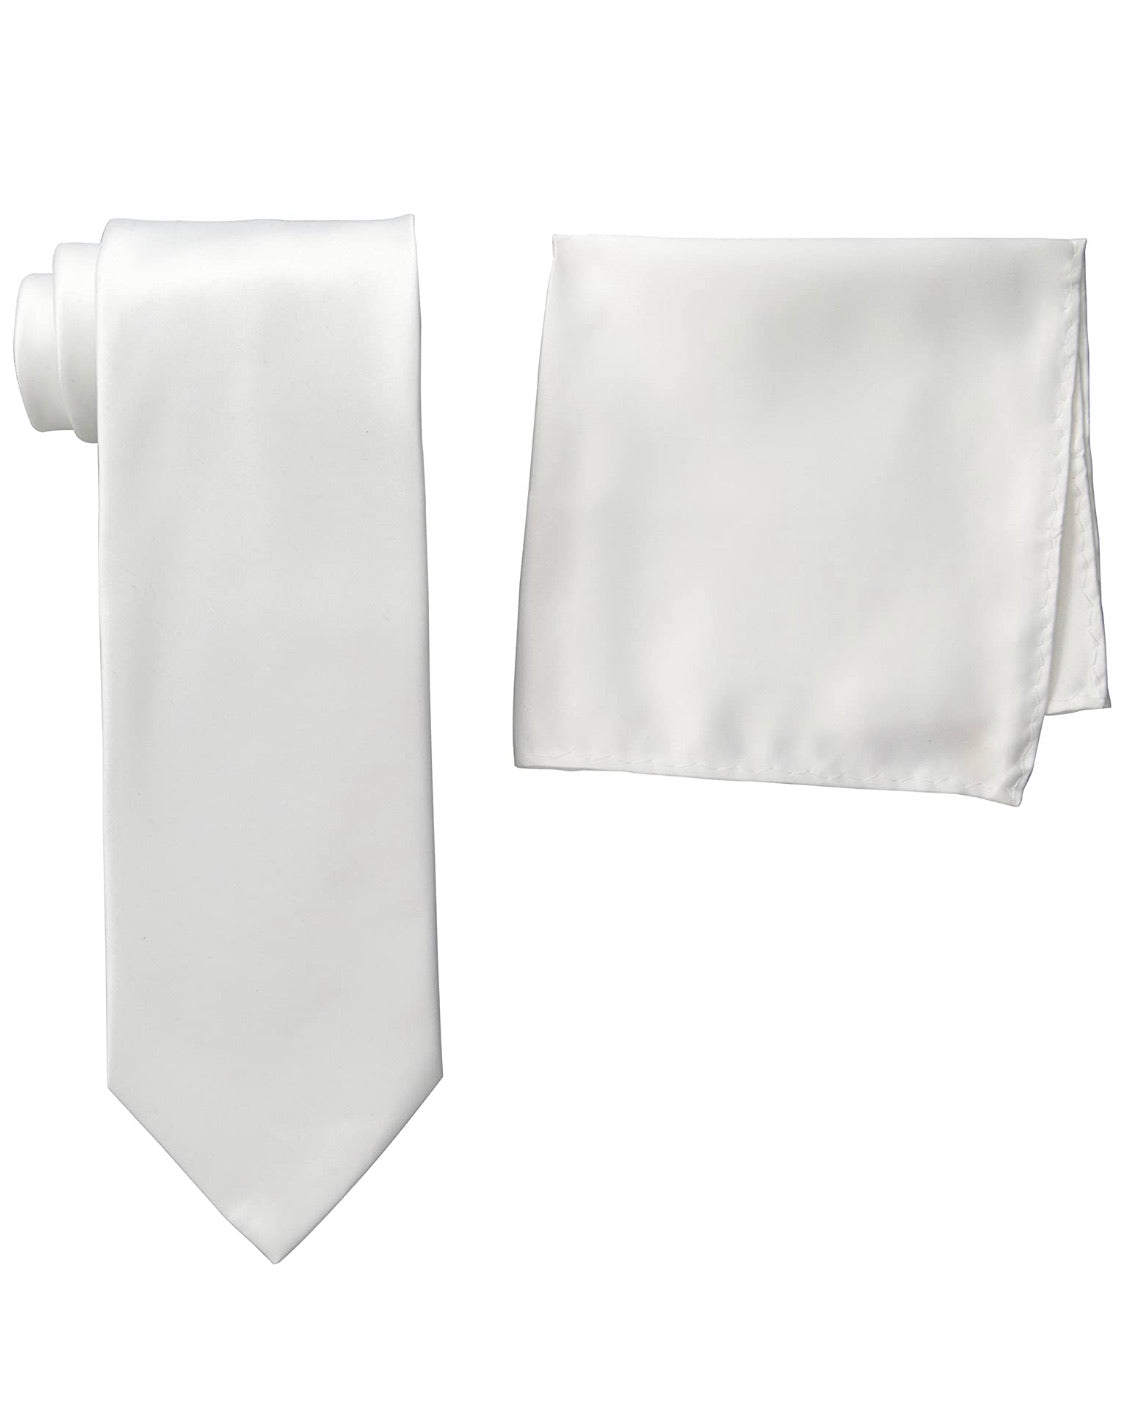 Stacy Adams Solid White Tie and Hanky - On Time Fashions Tuscaloosa